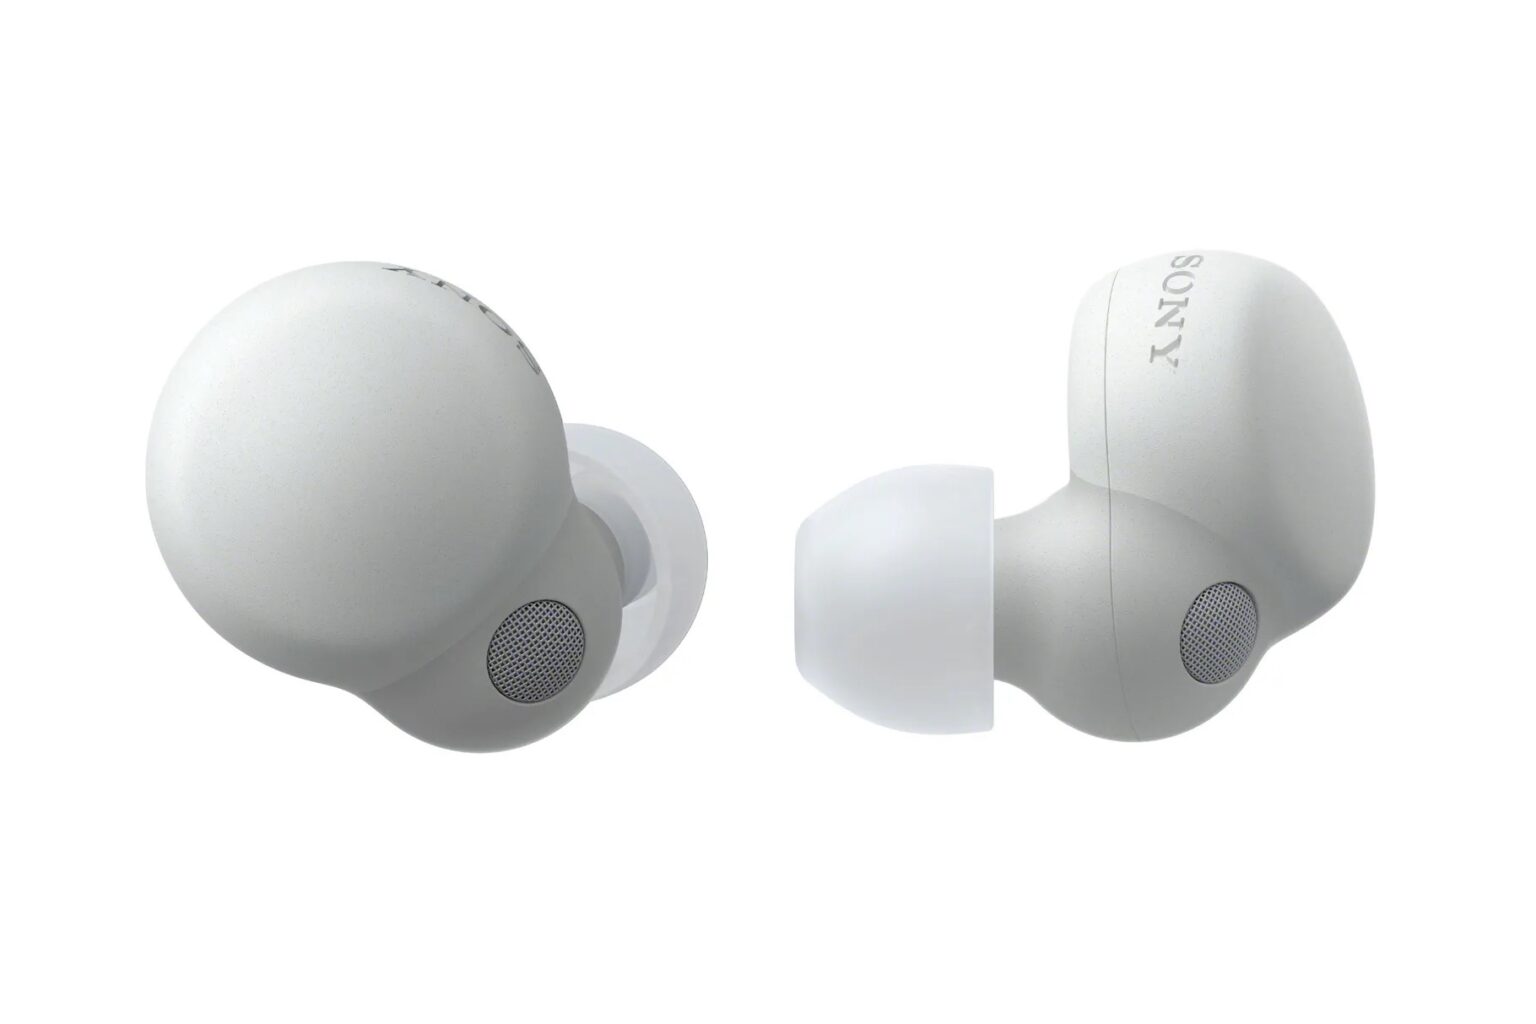 Sony's new lightweight LinkBuds S with ANC cost $199.99.